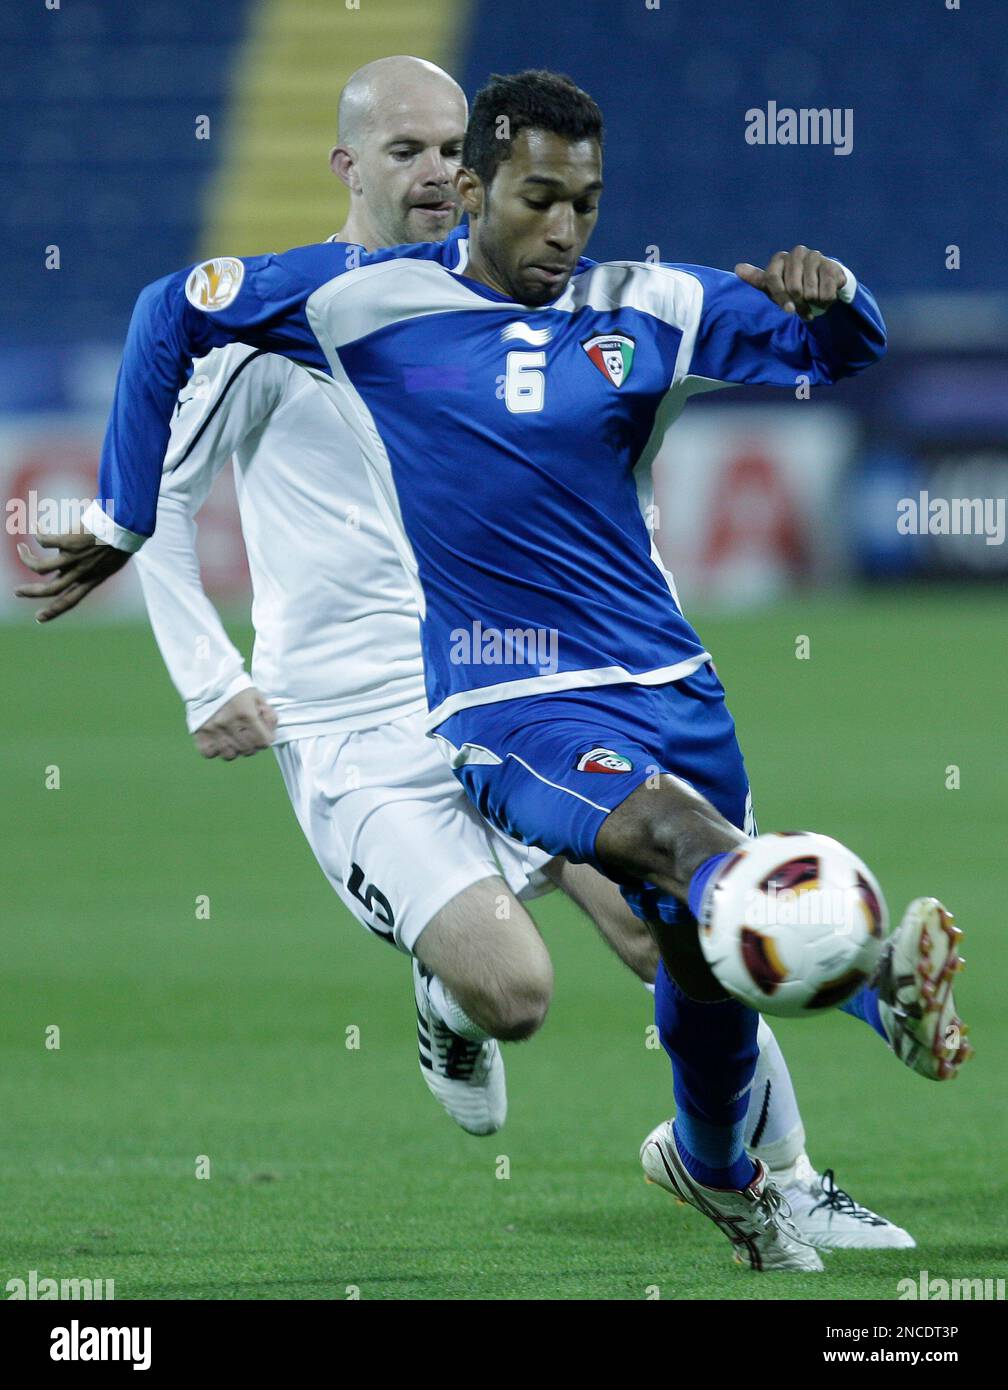 Kuwait's Amer Matoug, foreground, controls the ball against Uzbekistan's Alexander Geynrikh, during their AFC Asian Cup group A soccer match at the Al-Gharafa Stadium, in Doha, Wednesday Jan. 12, 2011. (AP Photo/Hussein Malla) Stock Photo